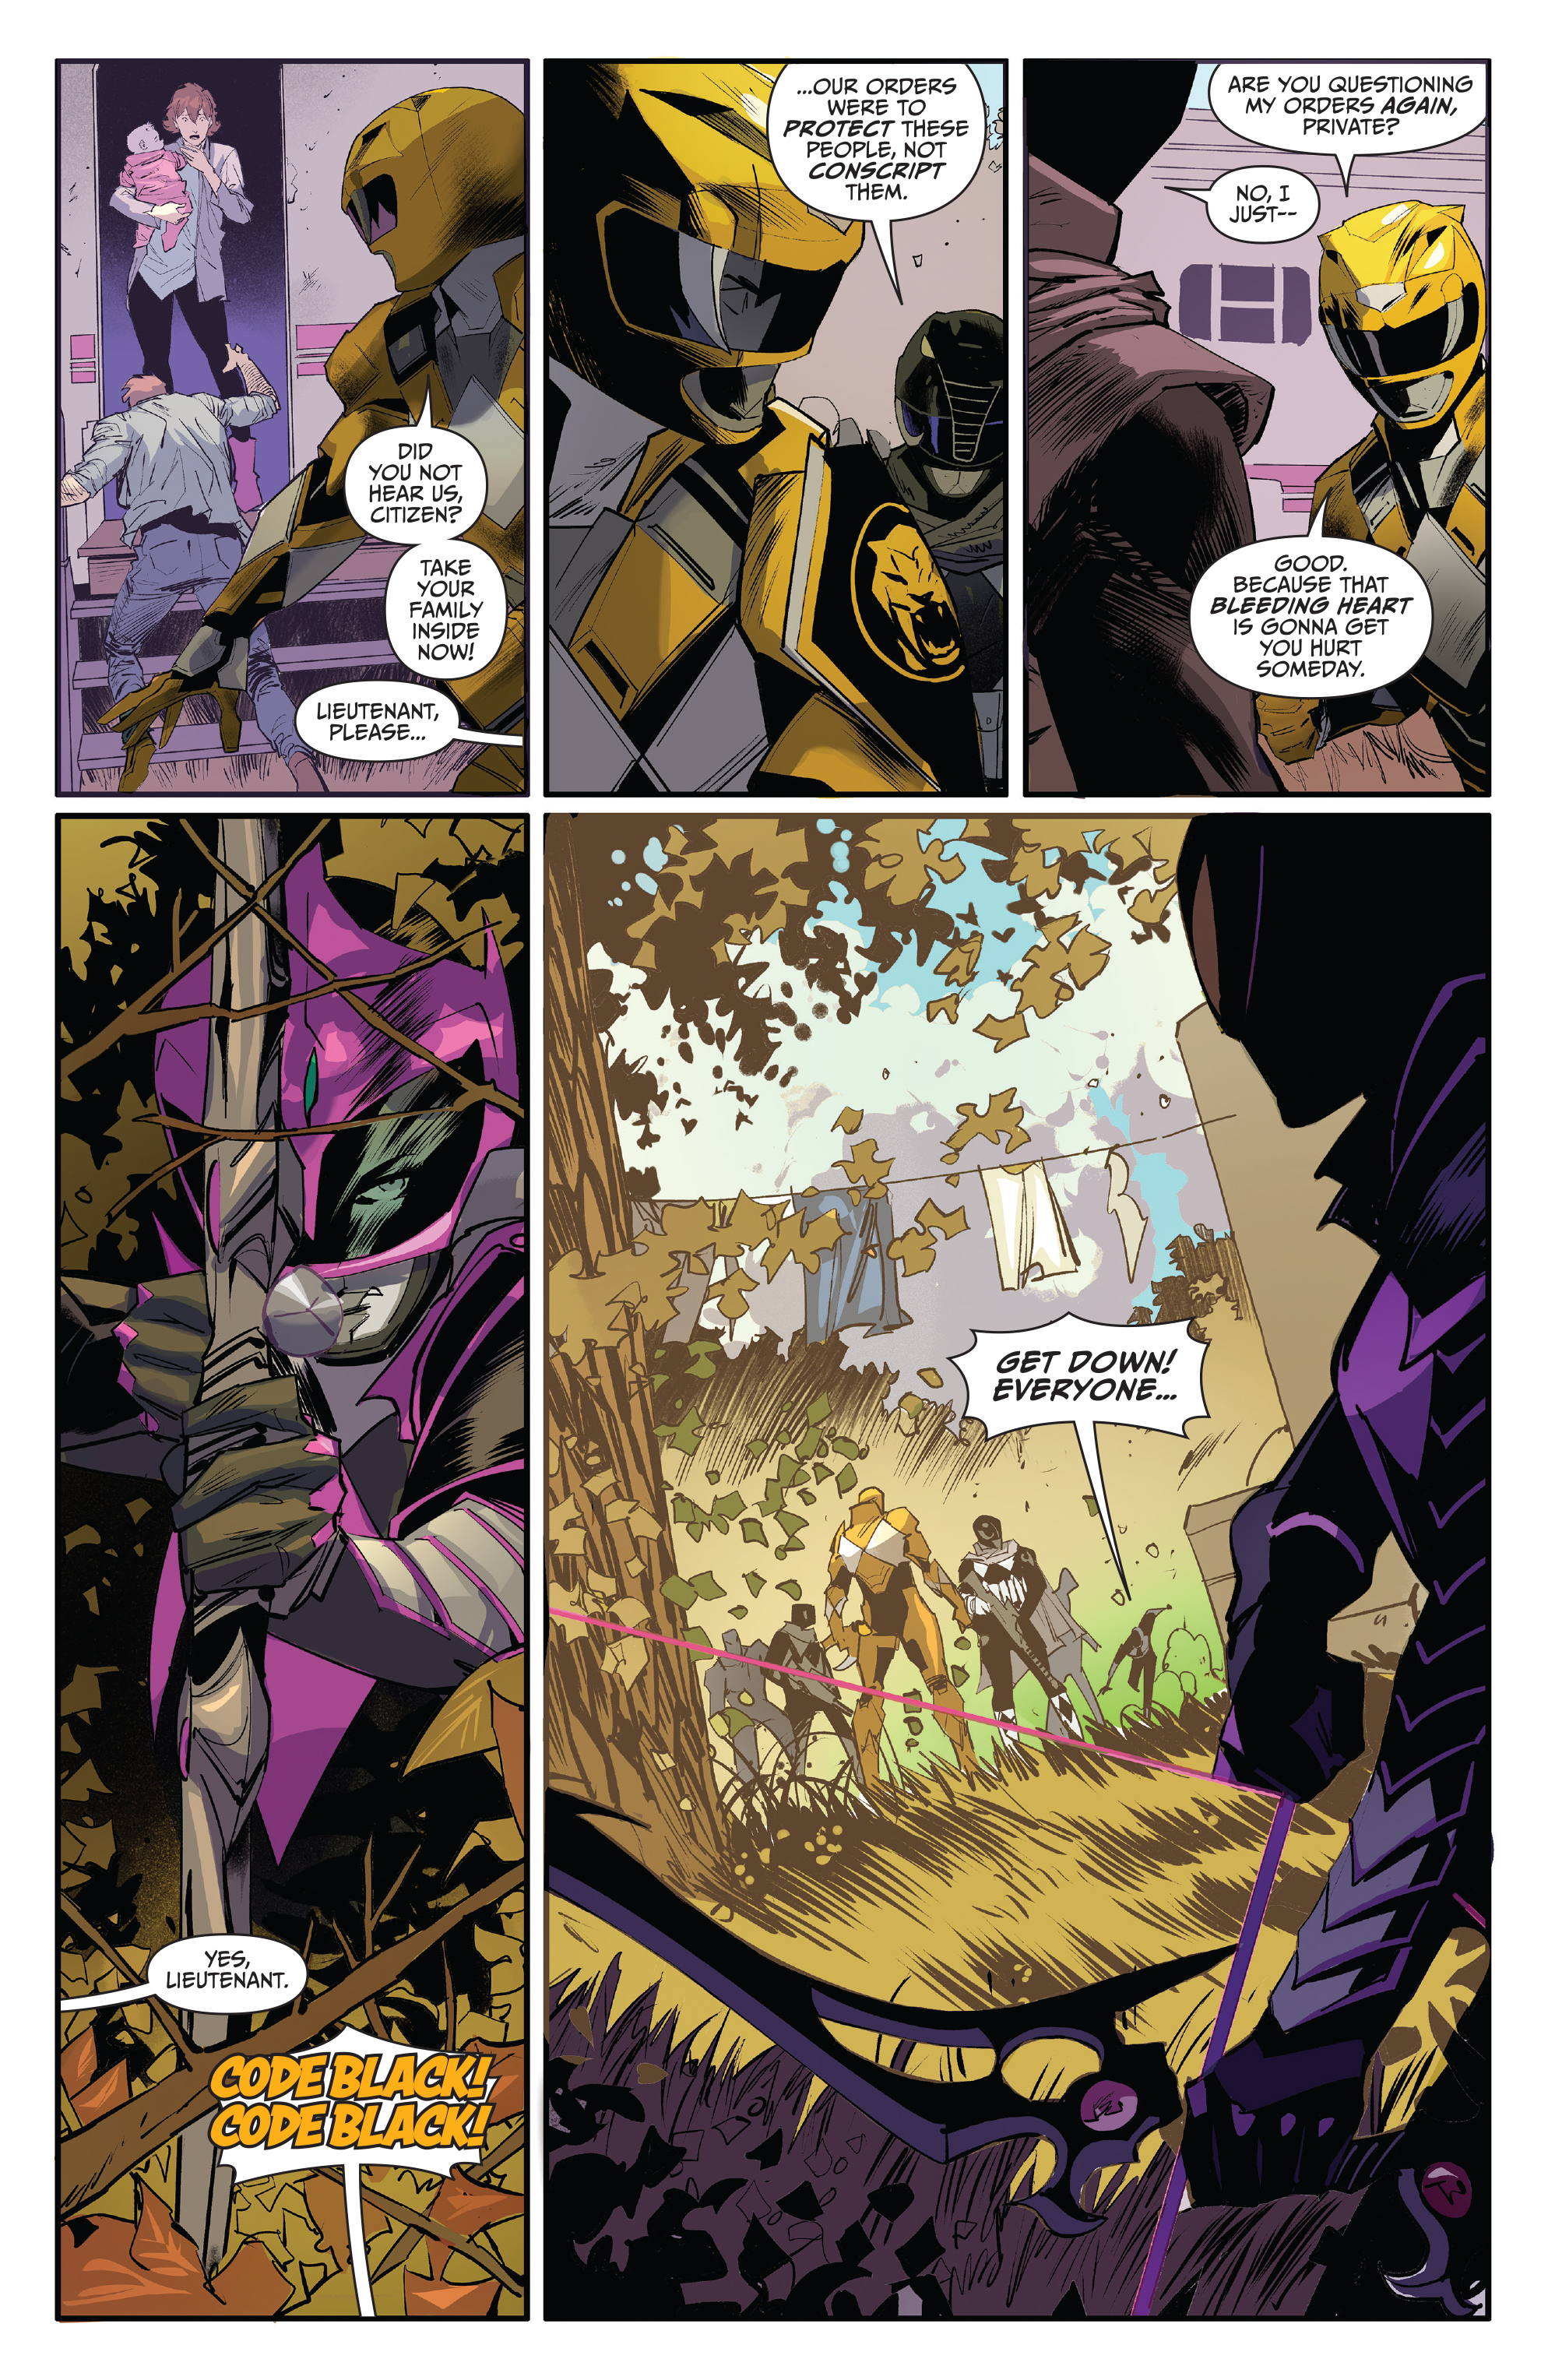 Power Rangers: Ranger Slayer (2020-): Chapter 1 - Page 5